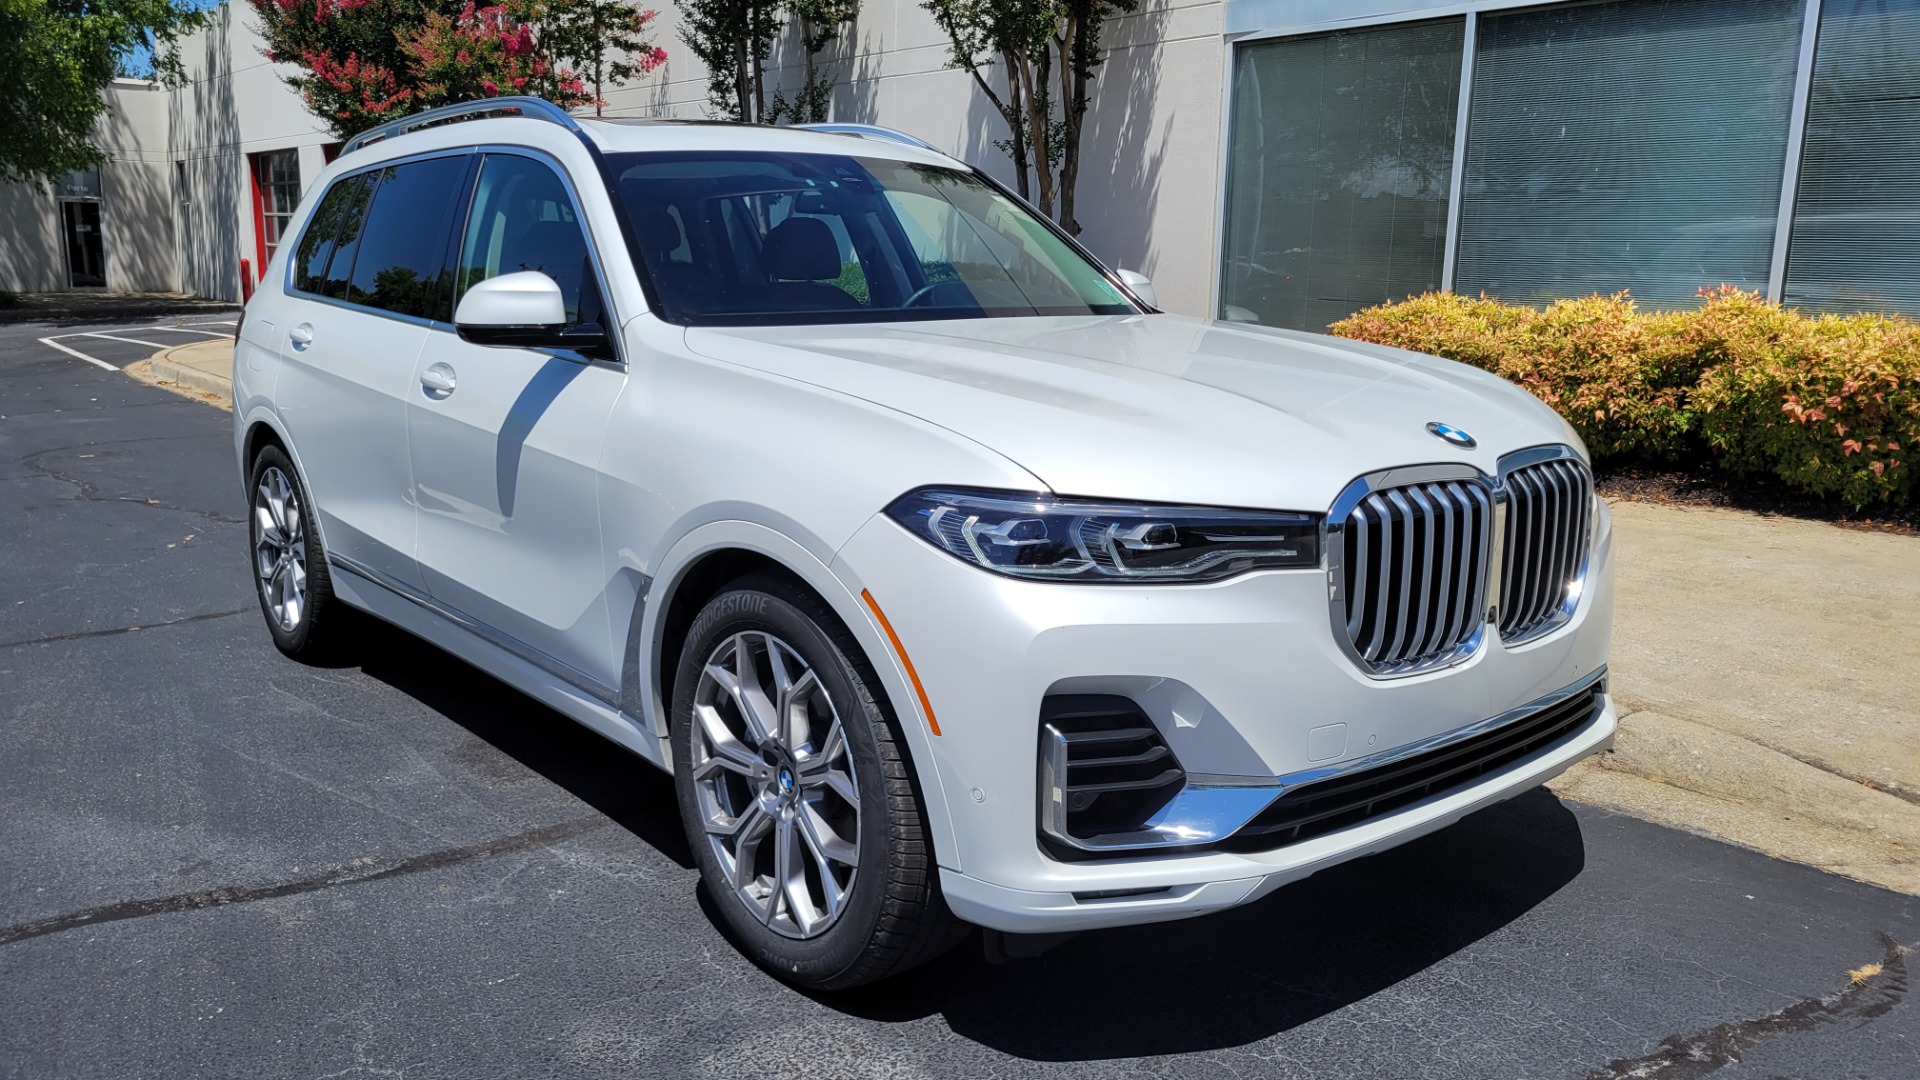 Used 2019 BMW X7 XDRIVE40I PREMIUM / NAV / HUD / PARK ASST PLUS / REMOTE START / 3D VIEW for sale $68,995 at Formula Imports in Charlotte NC 28227 5